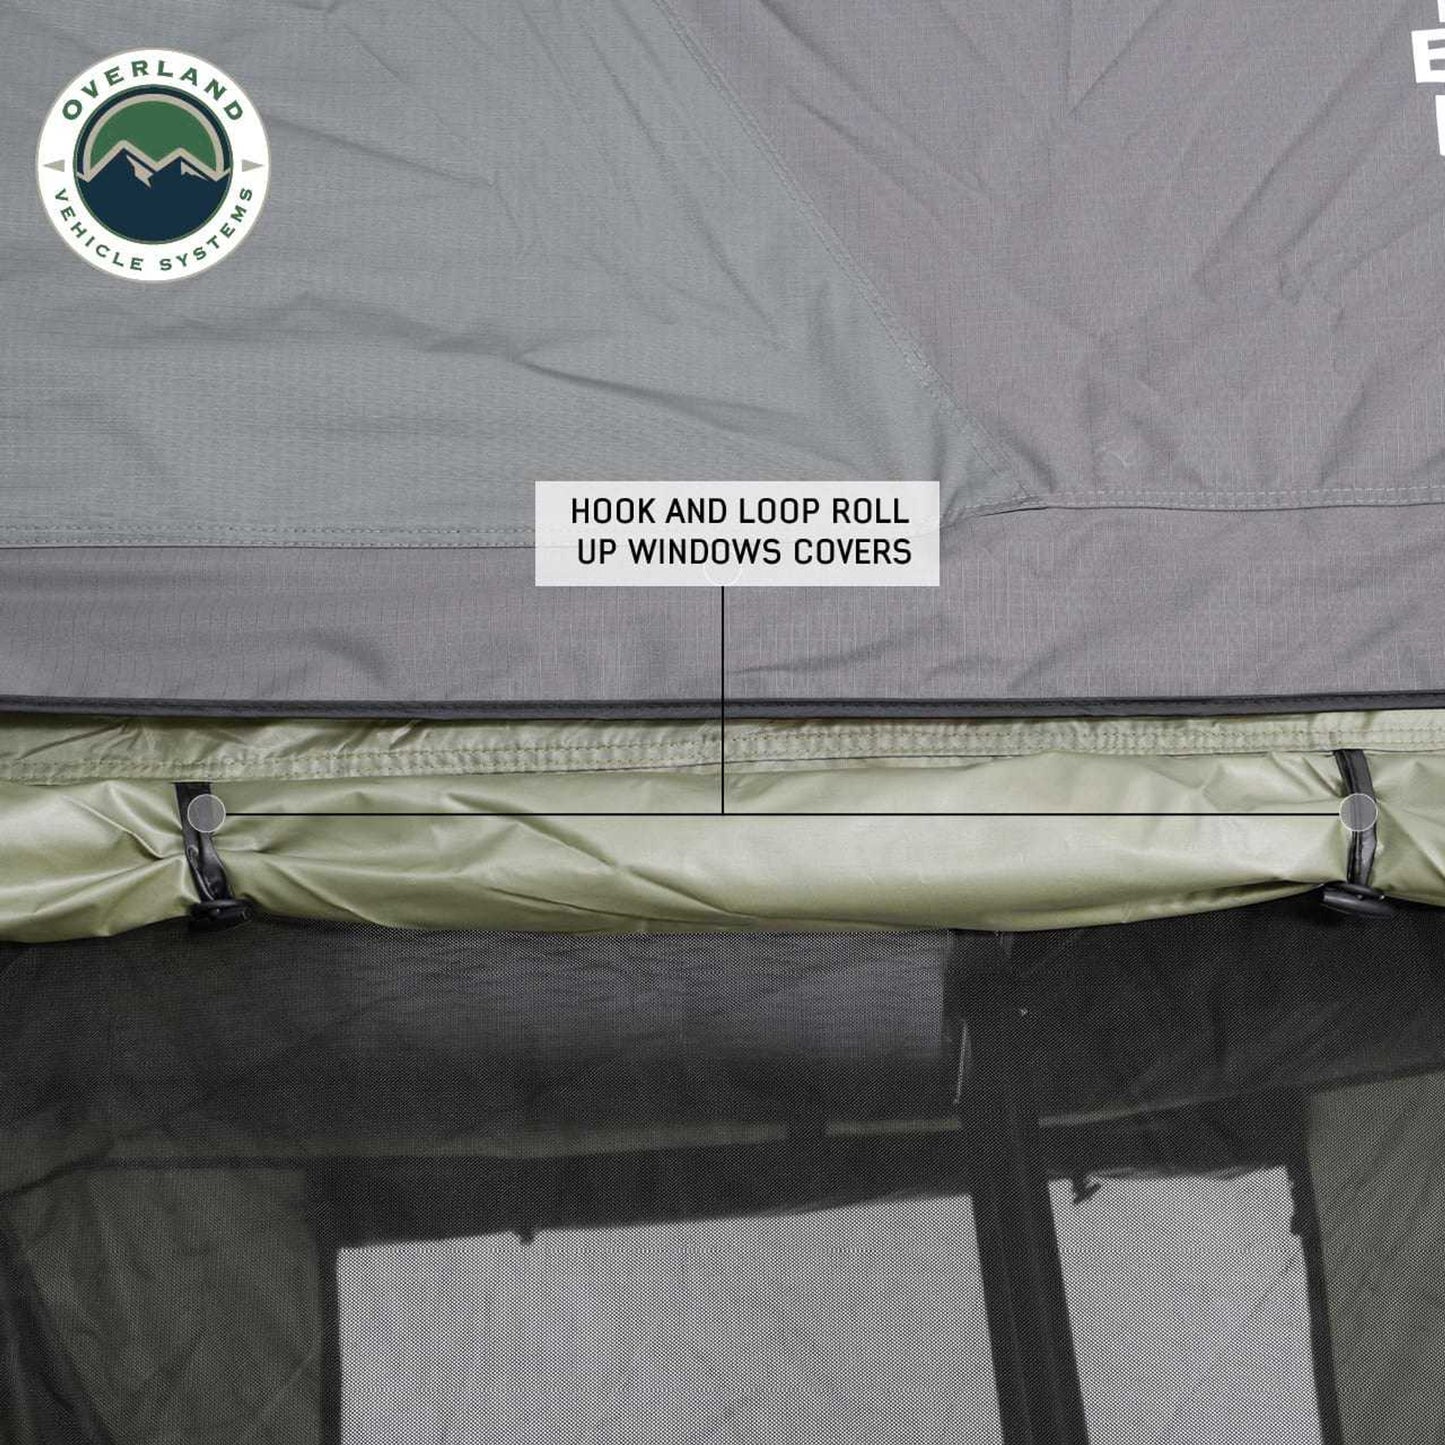 OVS Nomadic 2 Extended Roof Top Tent